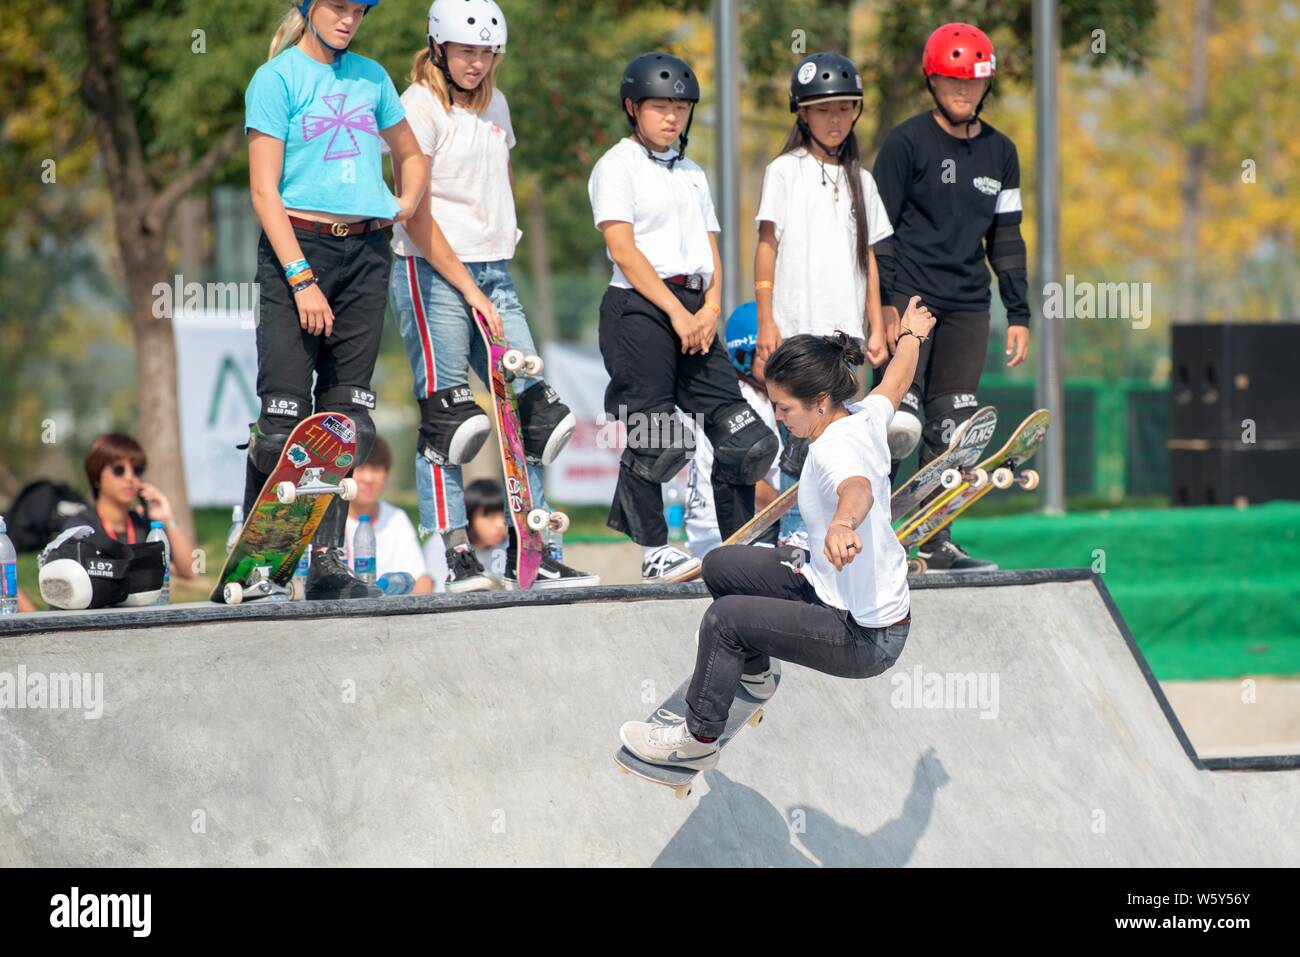 A player takes part in a training session ahead of the 2018 World Skate Park Skateboarding World Championships at the Nanjing Fish-mouth National Skat Stock Photo